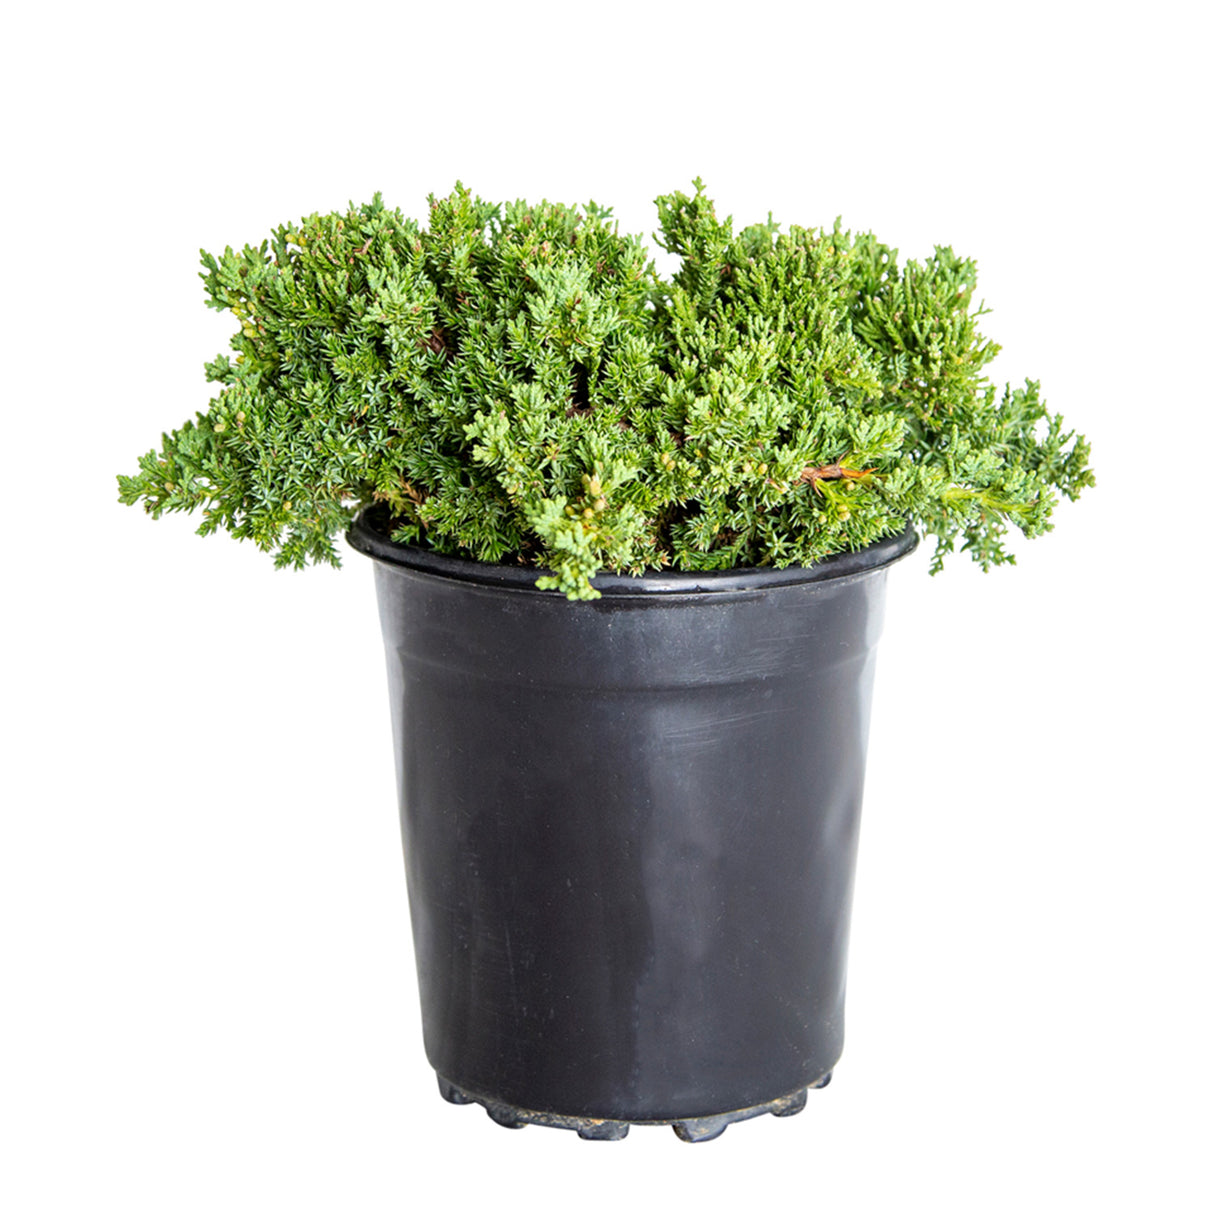 Blue pacific juniper for sale, green foliage conifer in a black pot on a white background